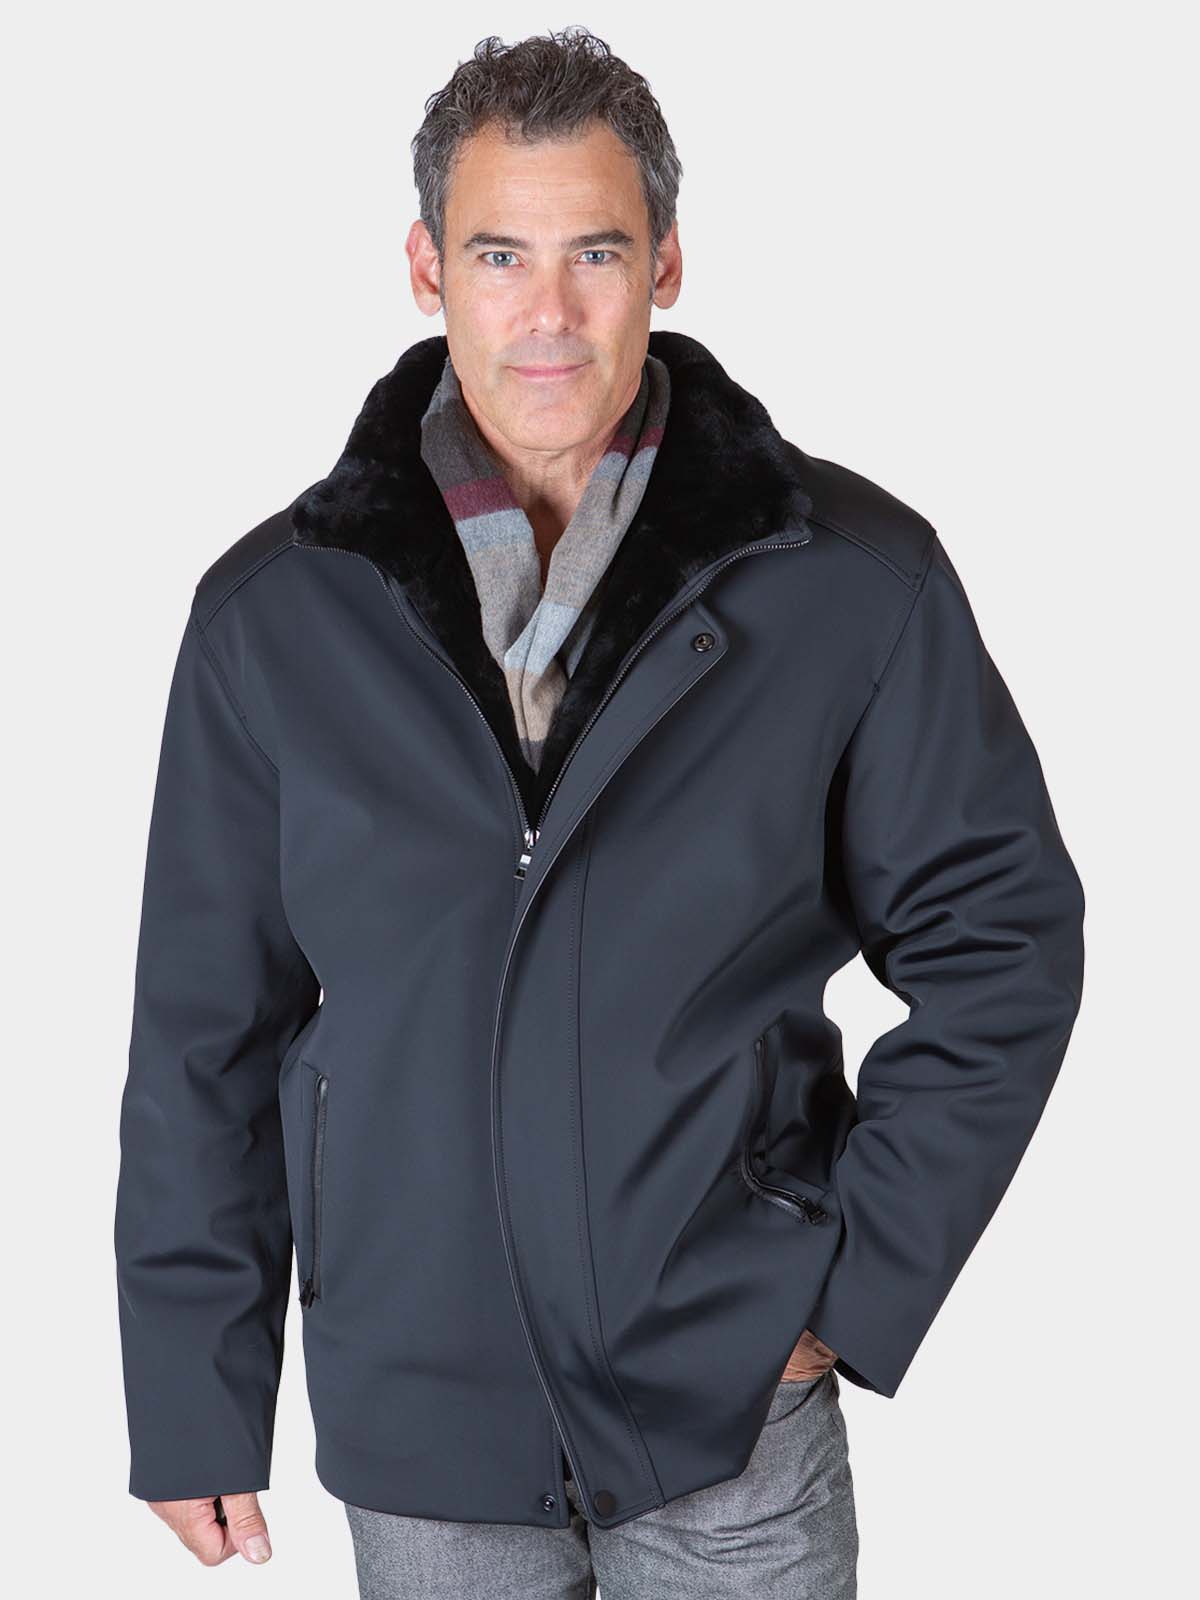 Man's Black Rain Fabric Jacket with Shearling Zip-Out Liner